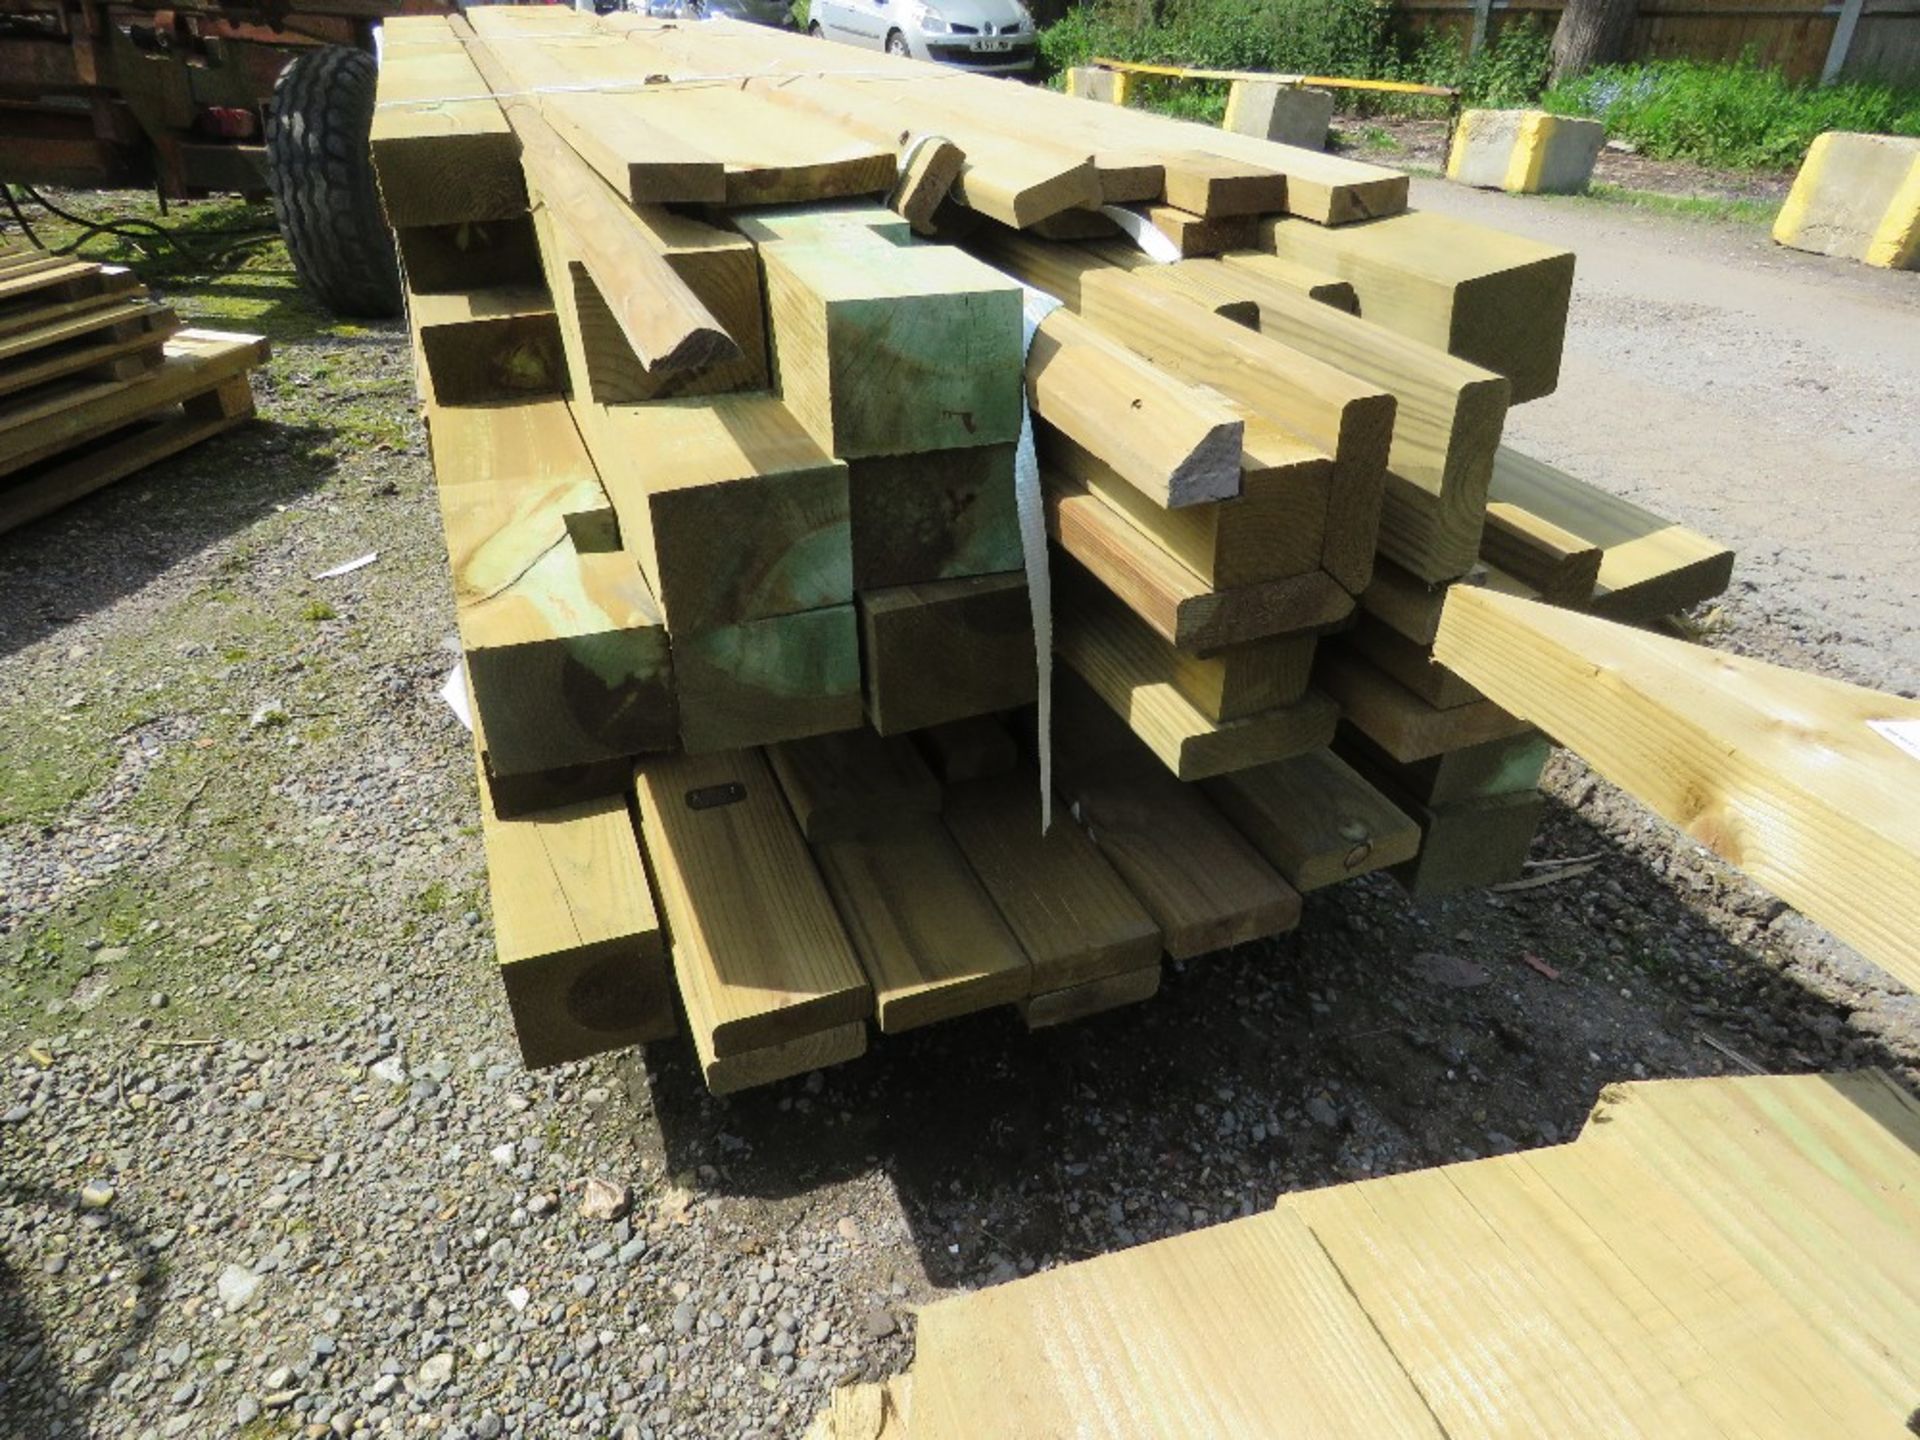 2 X BUNDLES OF TREATED FENCING TIMBERS, POSTS AND BOARDS AS SHOWN, 7-10FT LENGTH APPROX. - Image 3 of 4